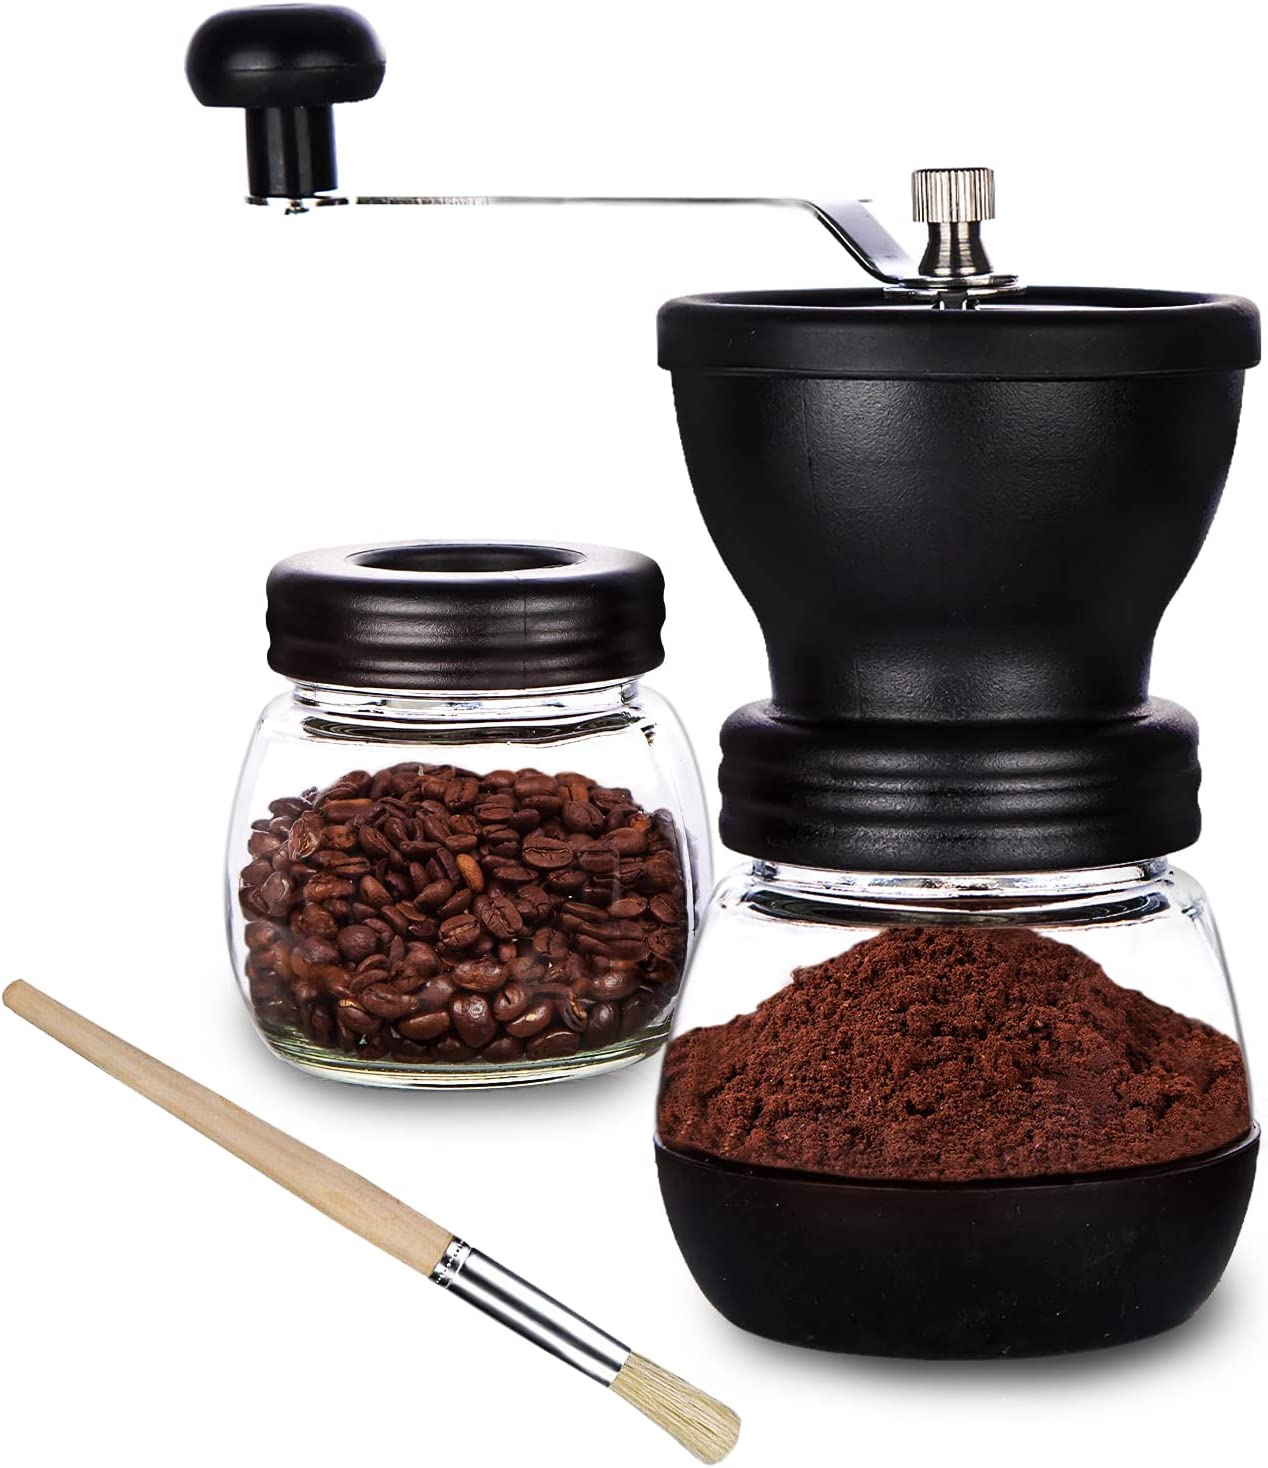 PARACITY Coffee Grinder with Ceramic Grinder, Manual Coffee Grinder, with 2 Glasses (11 oz each) Stainless Steel Handles, Coffee Grinder for Filter Coffee, Espresso, French Press